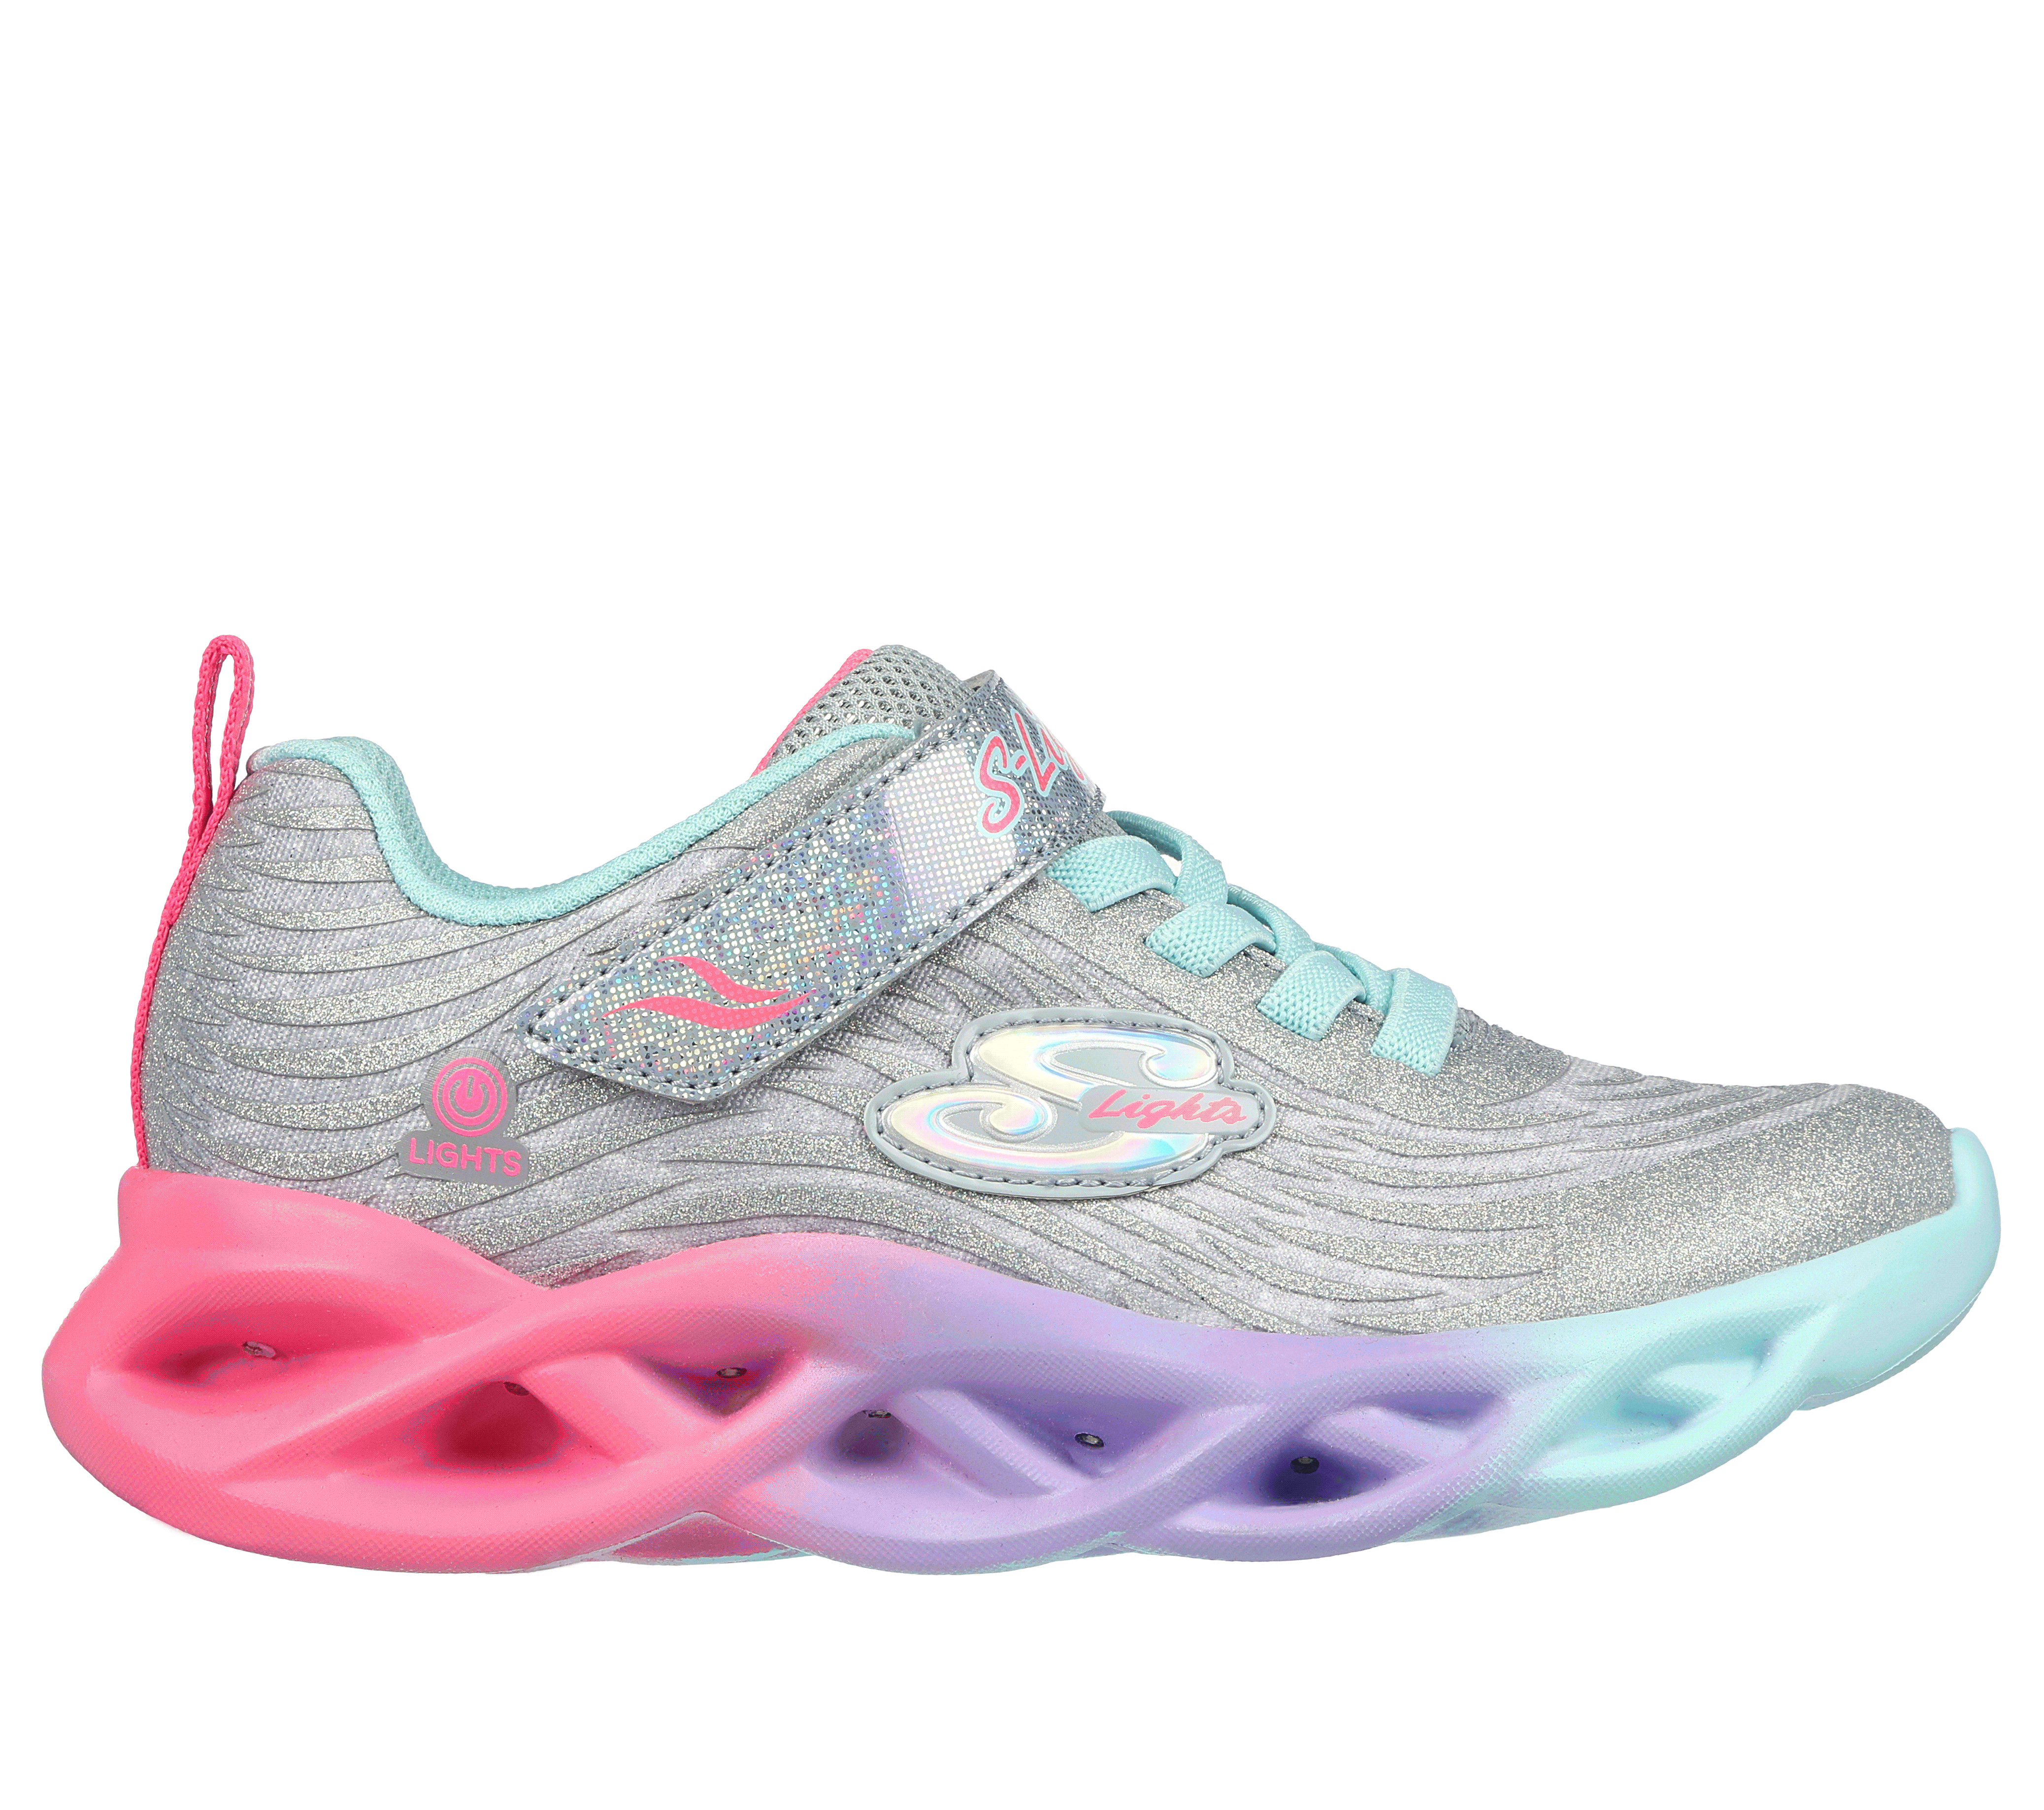 S Twisty Brights - Color Radiant | SKECHERS